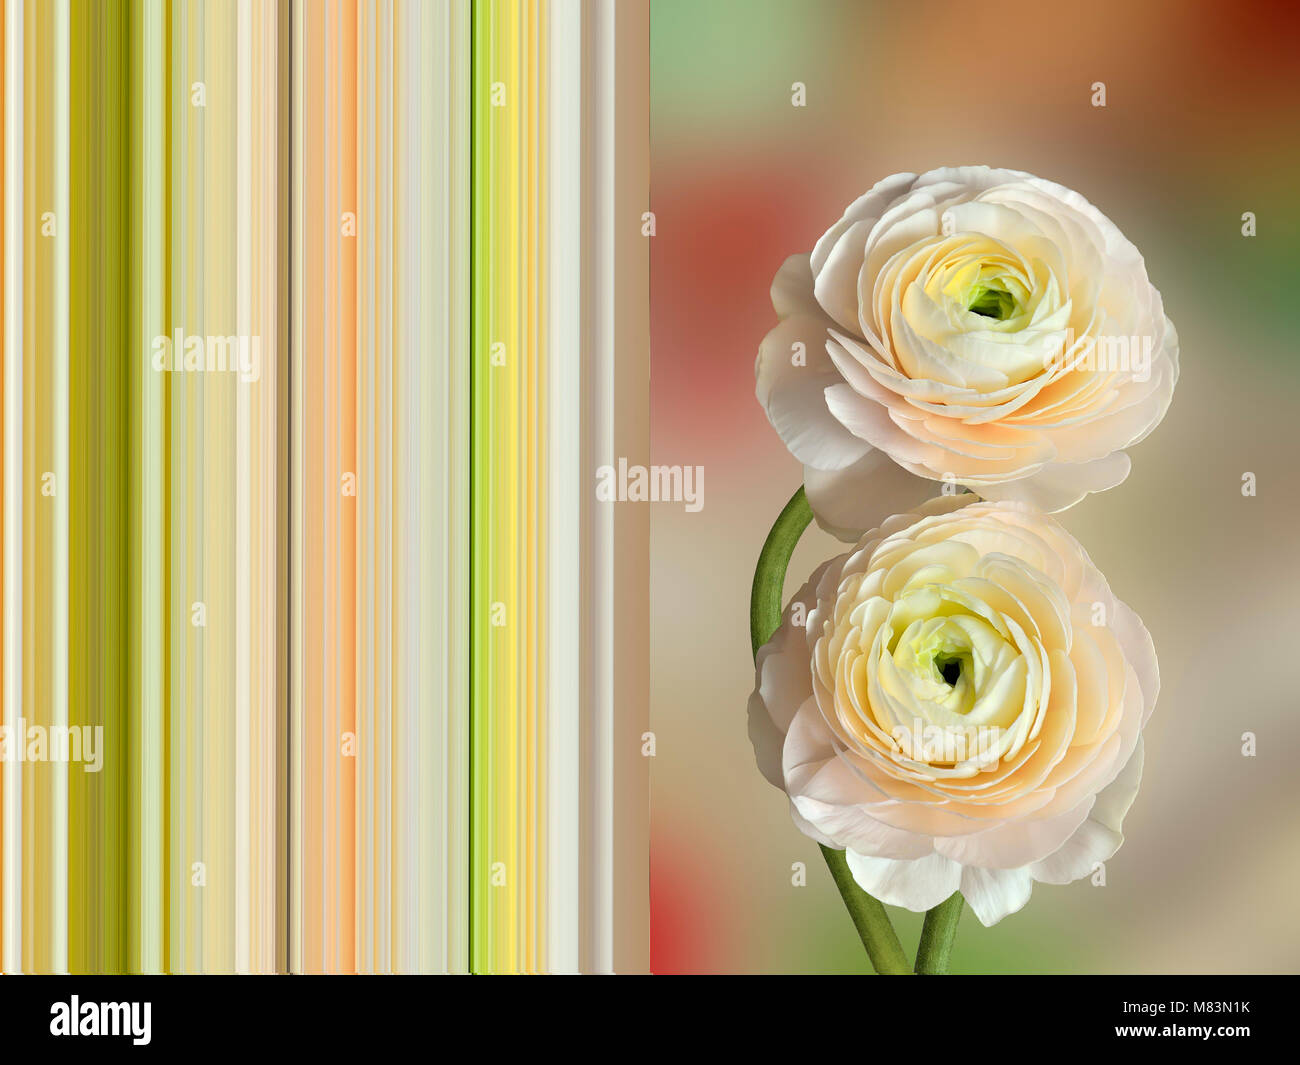 Two delicate pale-pink ranunculus flowers close up - spring postcard concept with complementing striped background Stock Photo